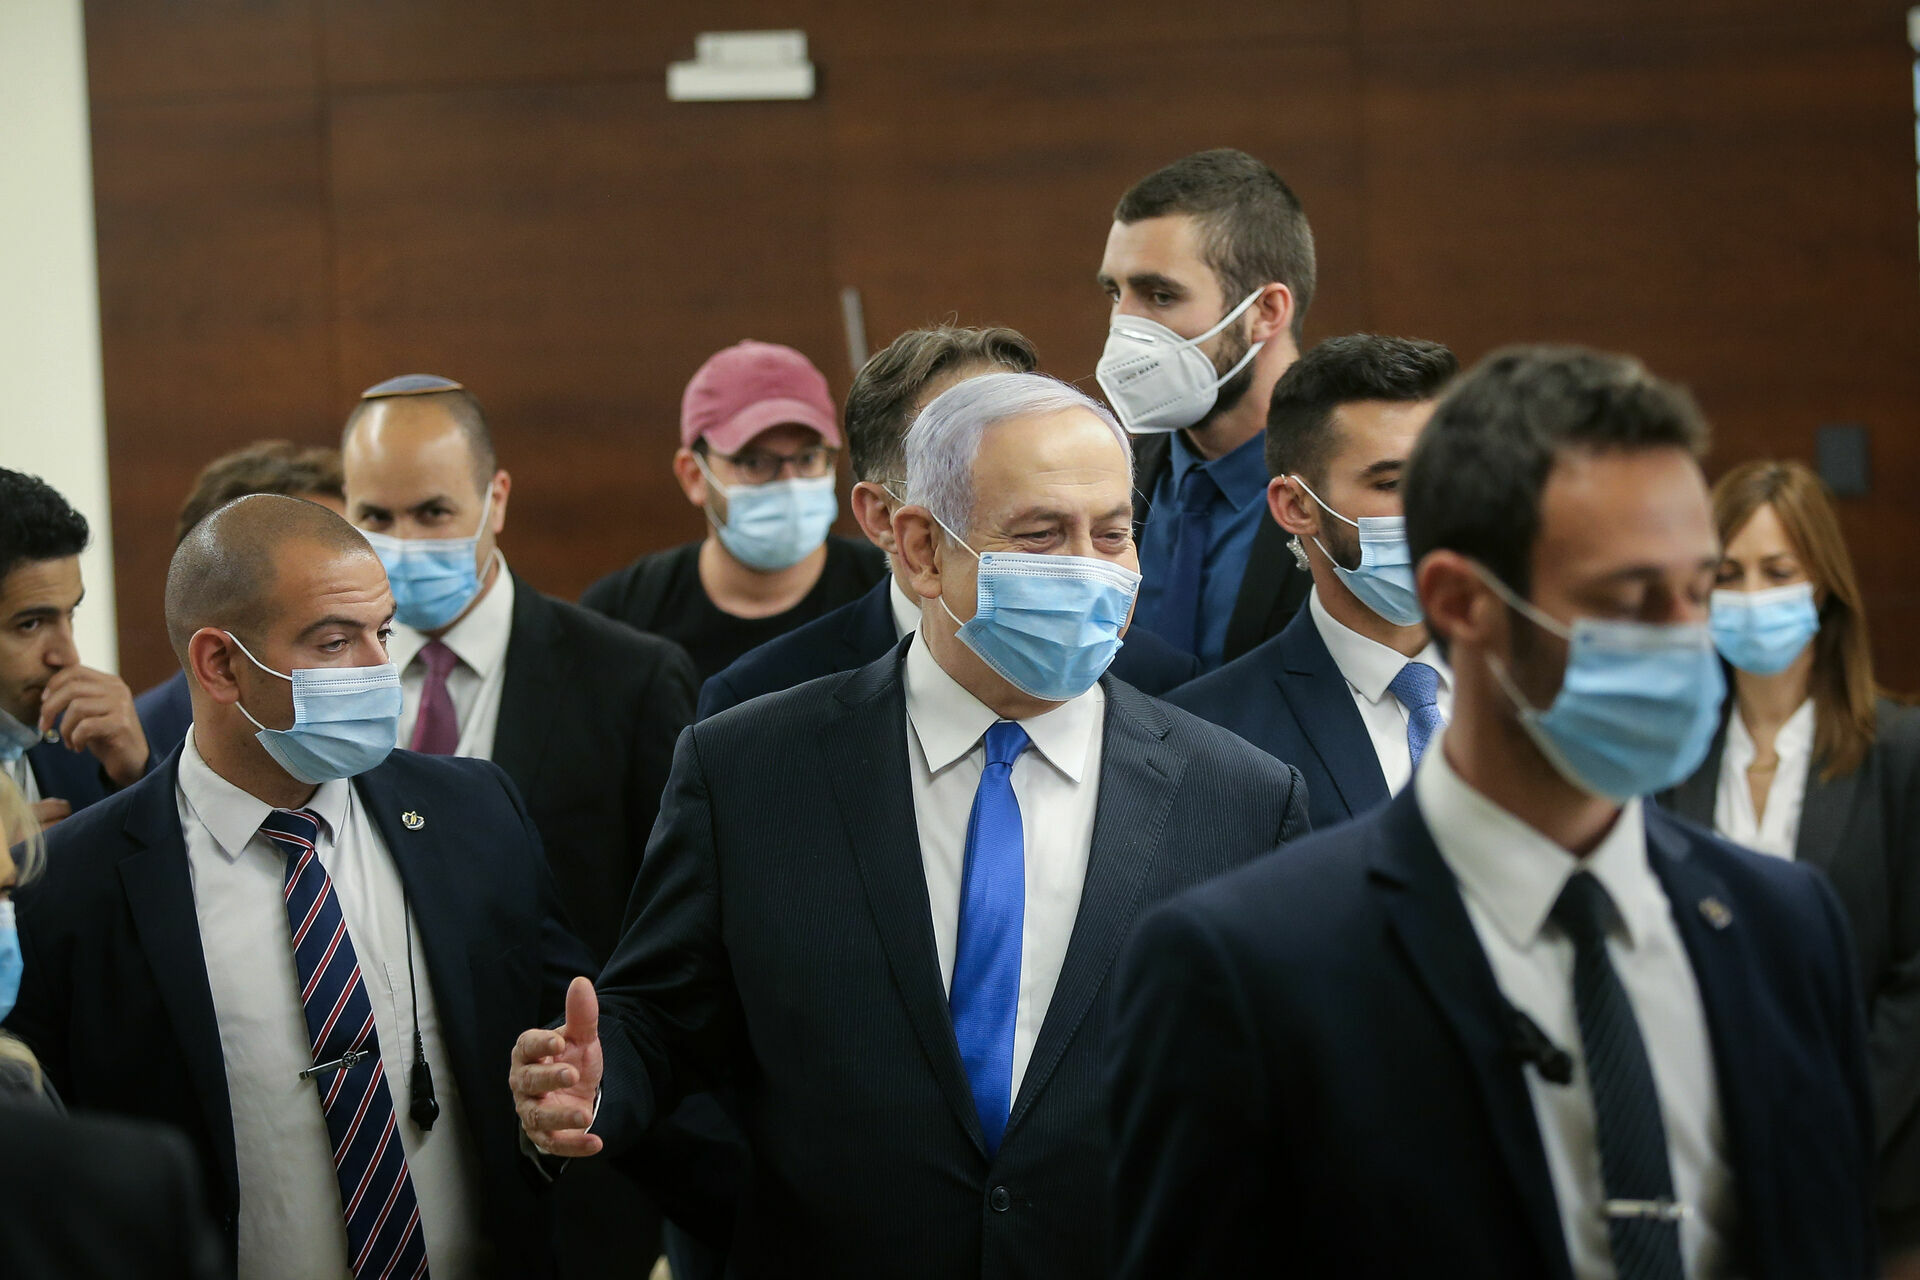 “Judea is ours”: The political crisis in Israel, lasting for 508 days, is over